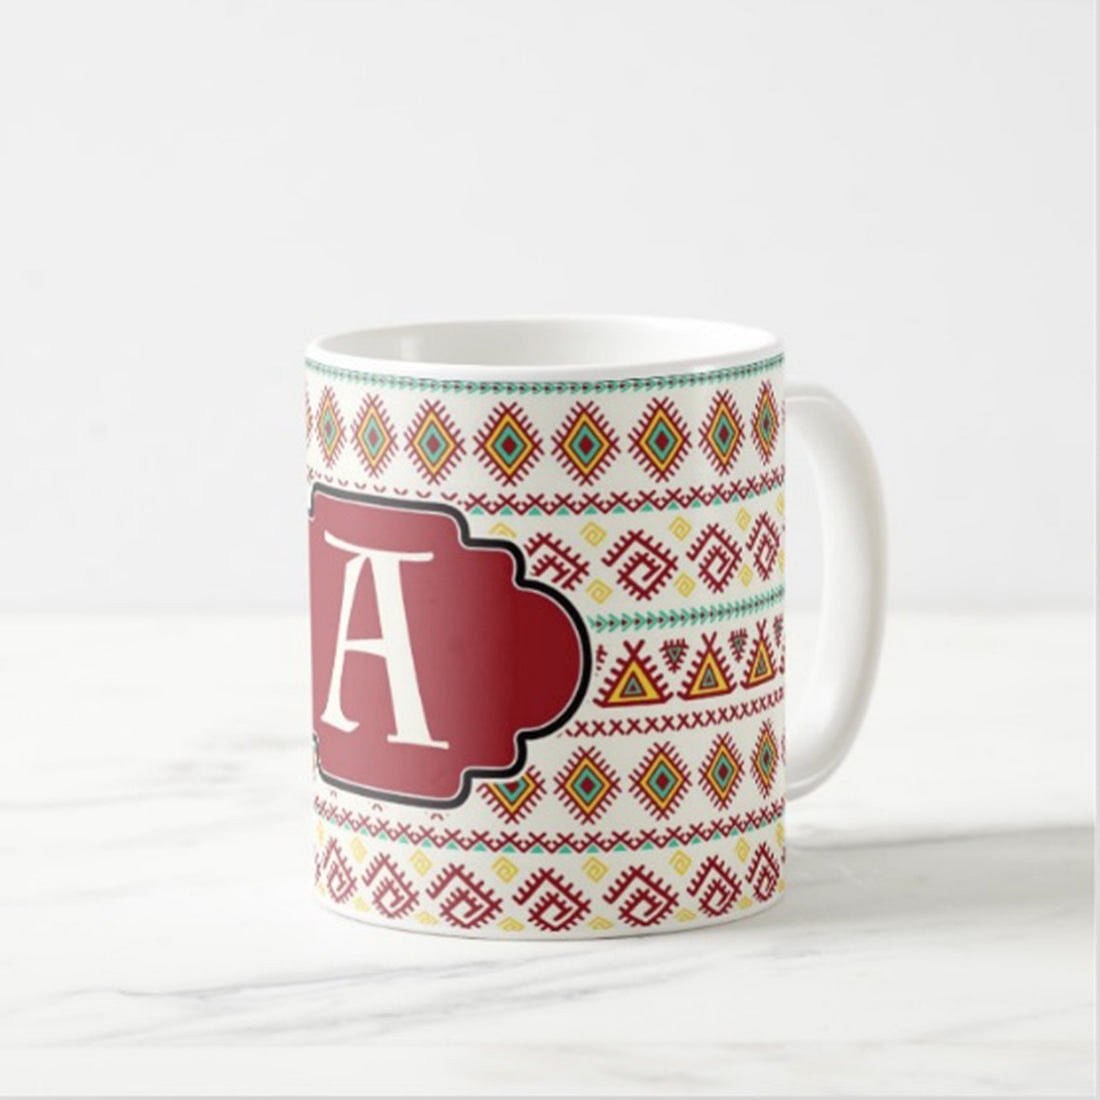 Personalized Printed Cups - Red Ethnic Nutcase